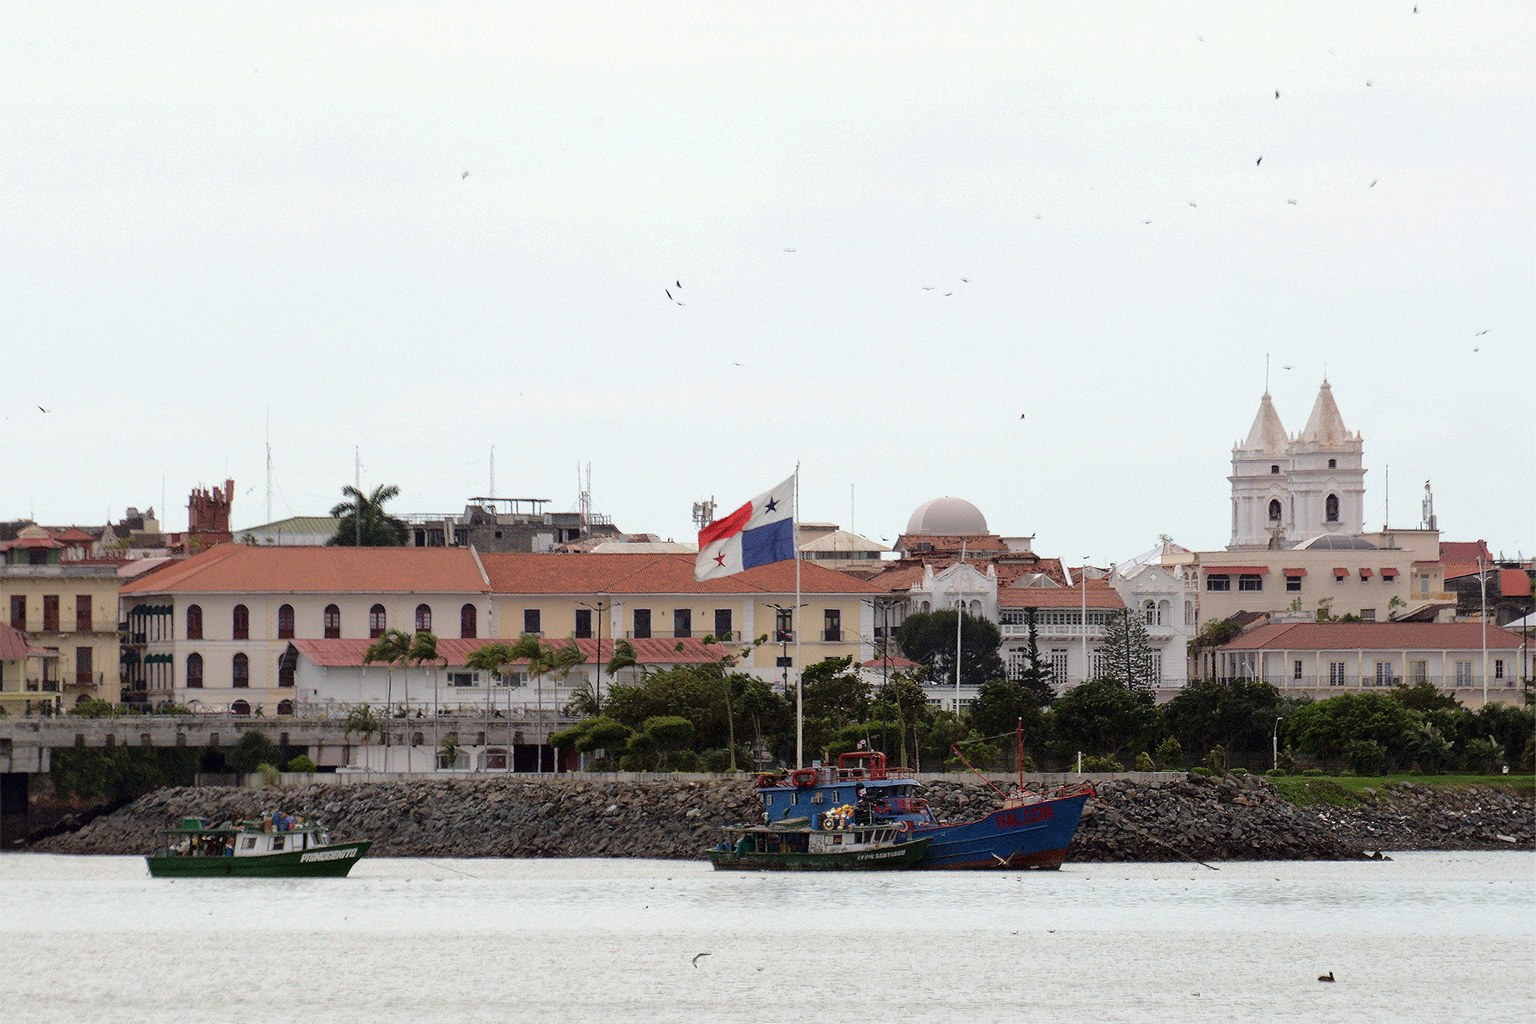 A fishing boat with a Panamanian flag. 